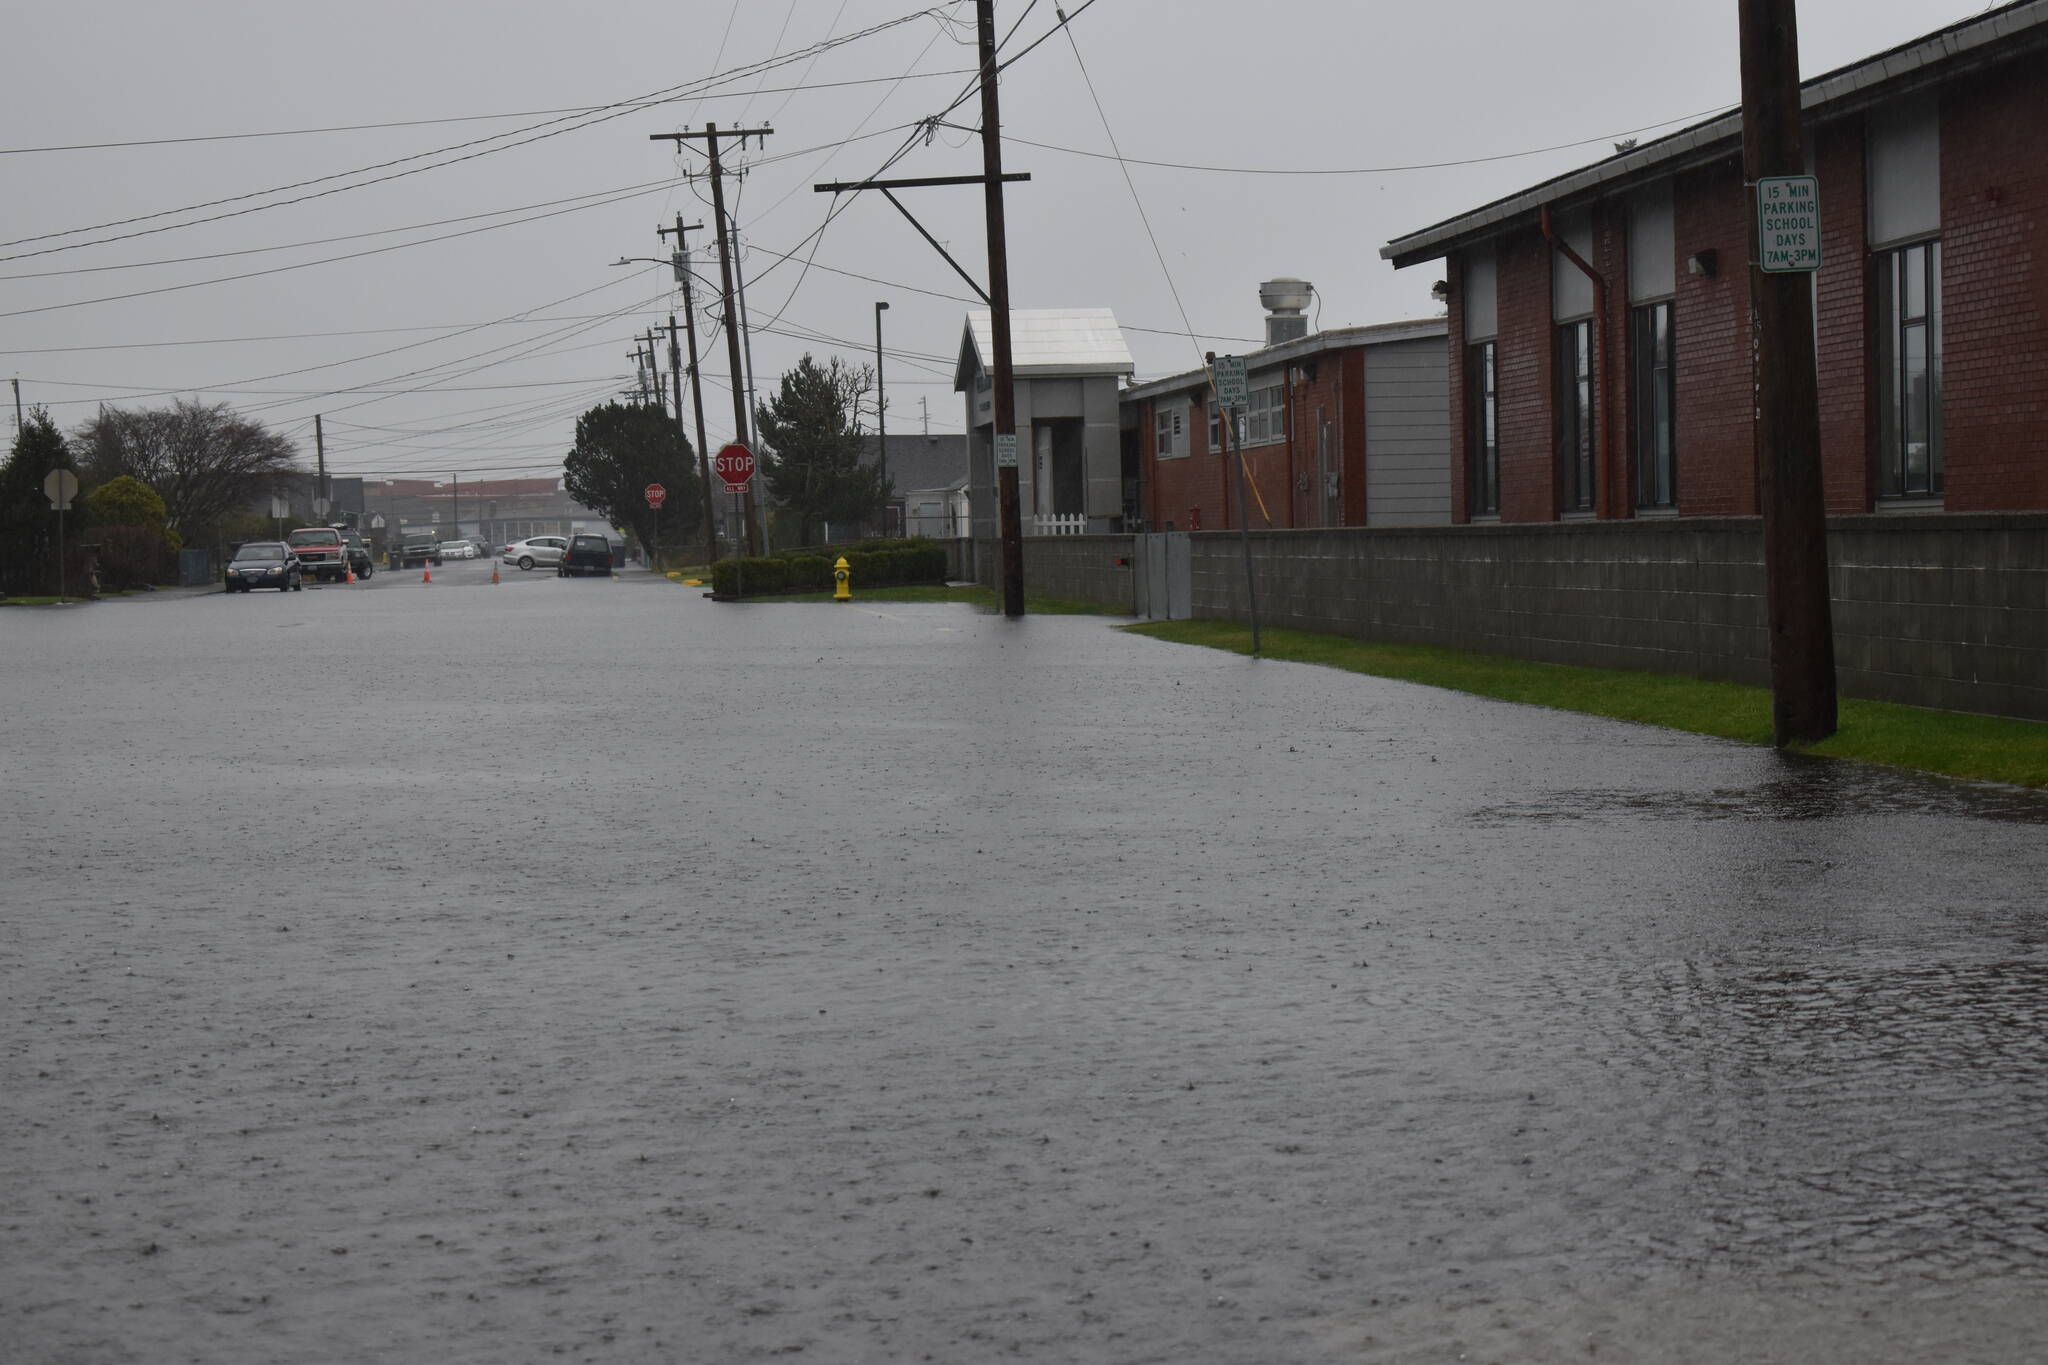 Rain on Thursday, Jan. 6, 2022, combined with a king tide measured at 10.4 feet, overwhelmed streets throughout Grays Harbor County, such as Bay Avenue’s stretch of road that runs in front of AJ West Elementary School in Aberdeen. (The Daily World file photo)